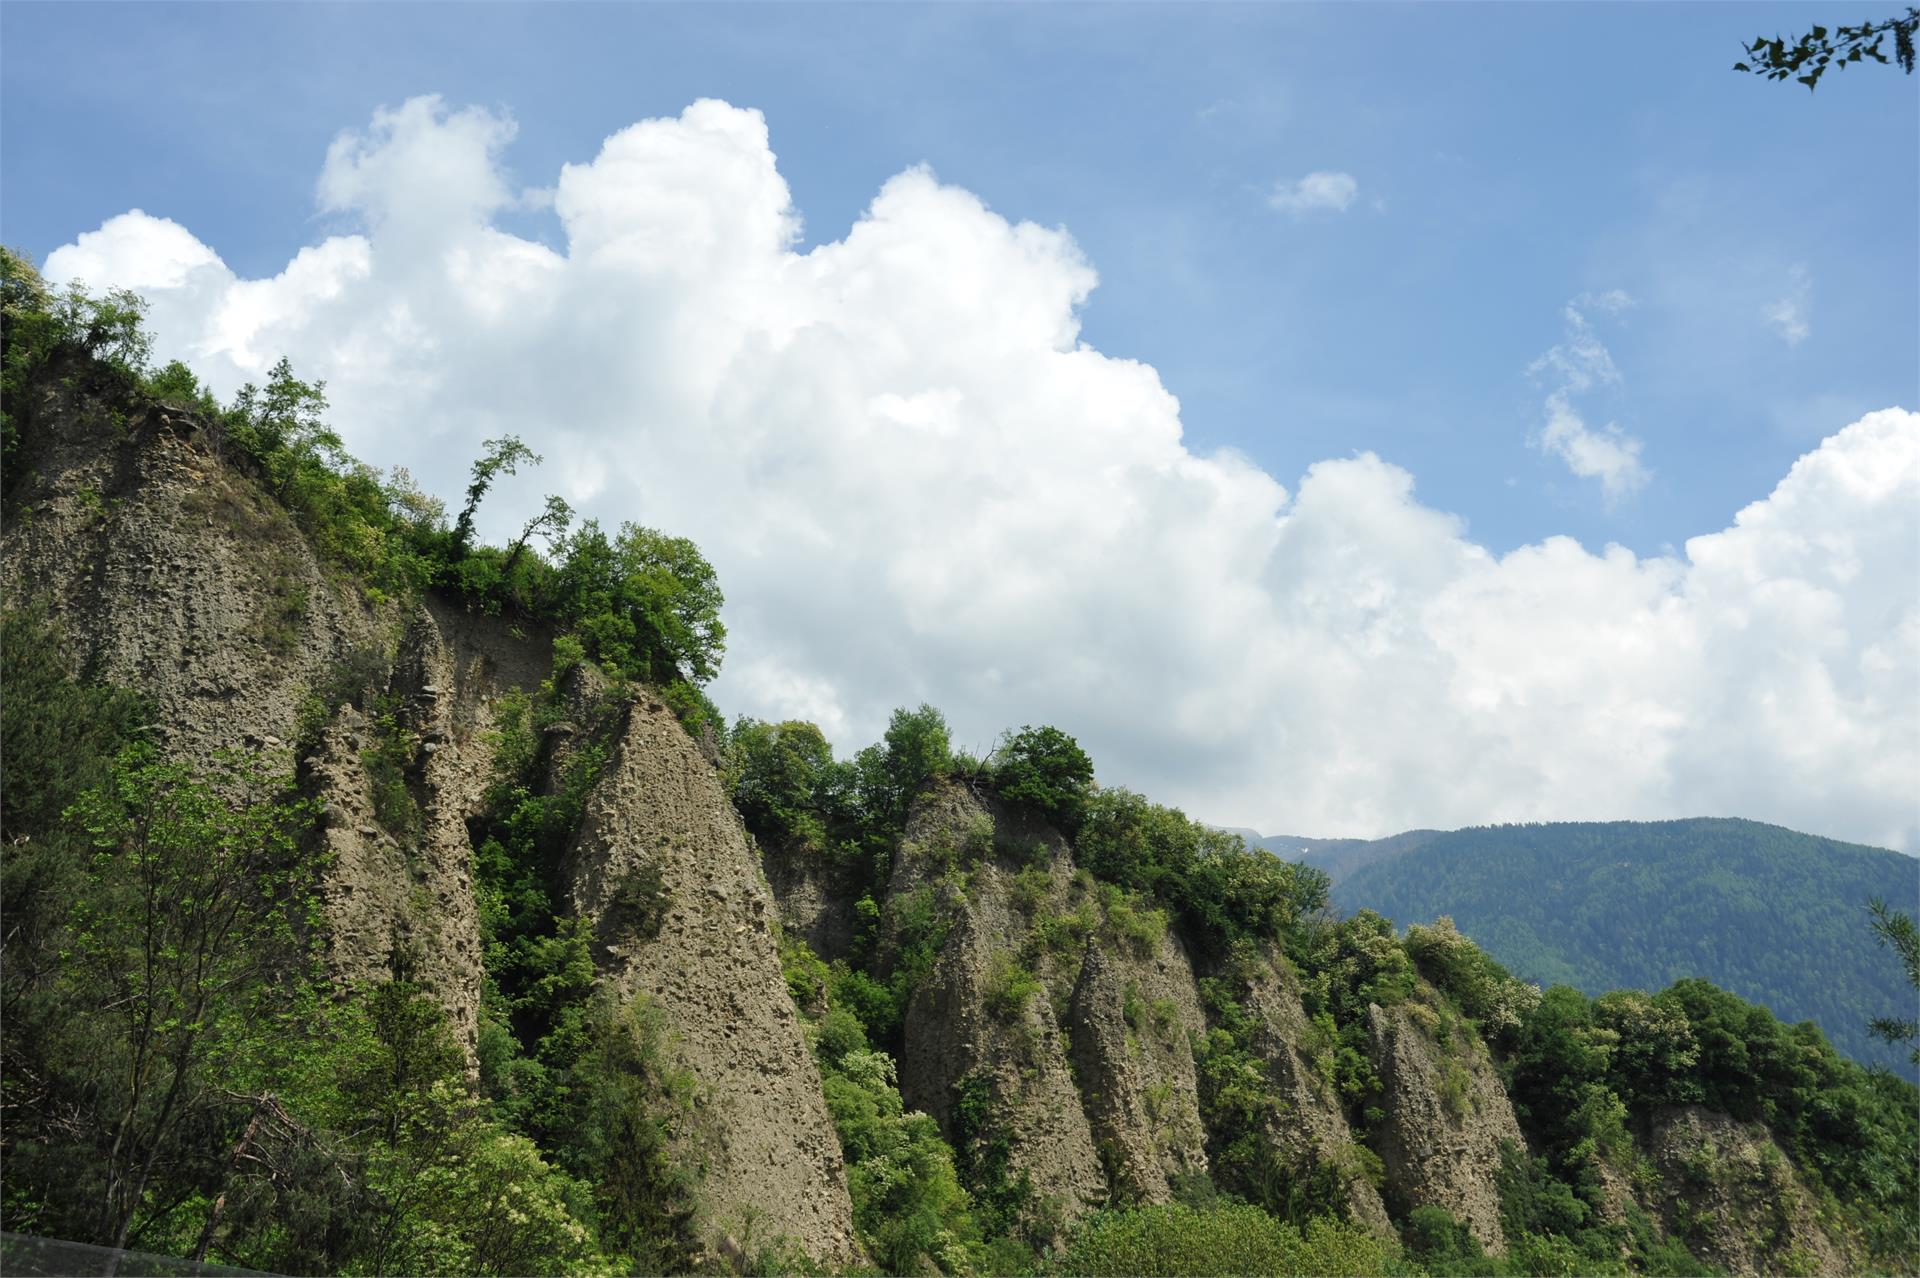 Earth Pyramids in Kuens/Caines